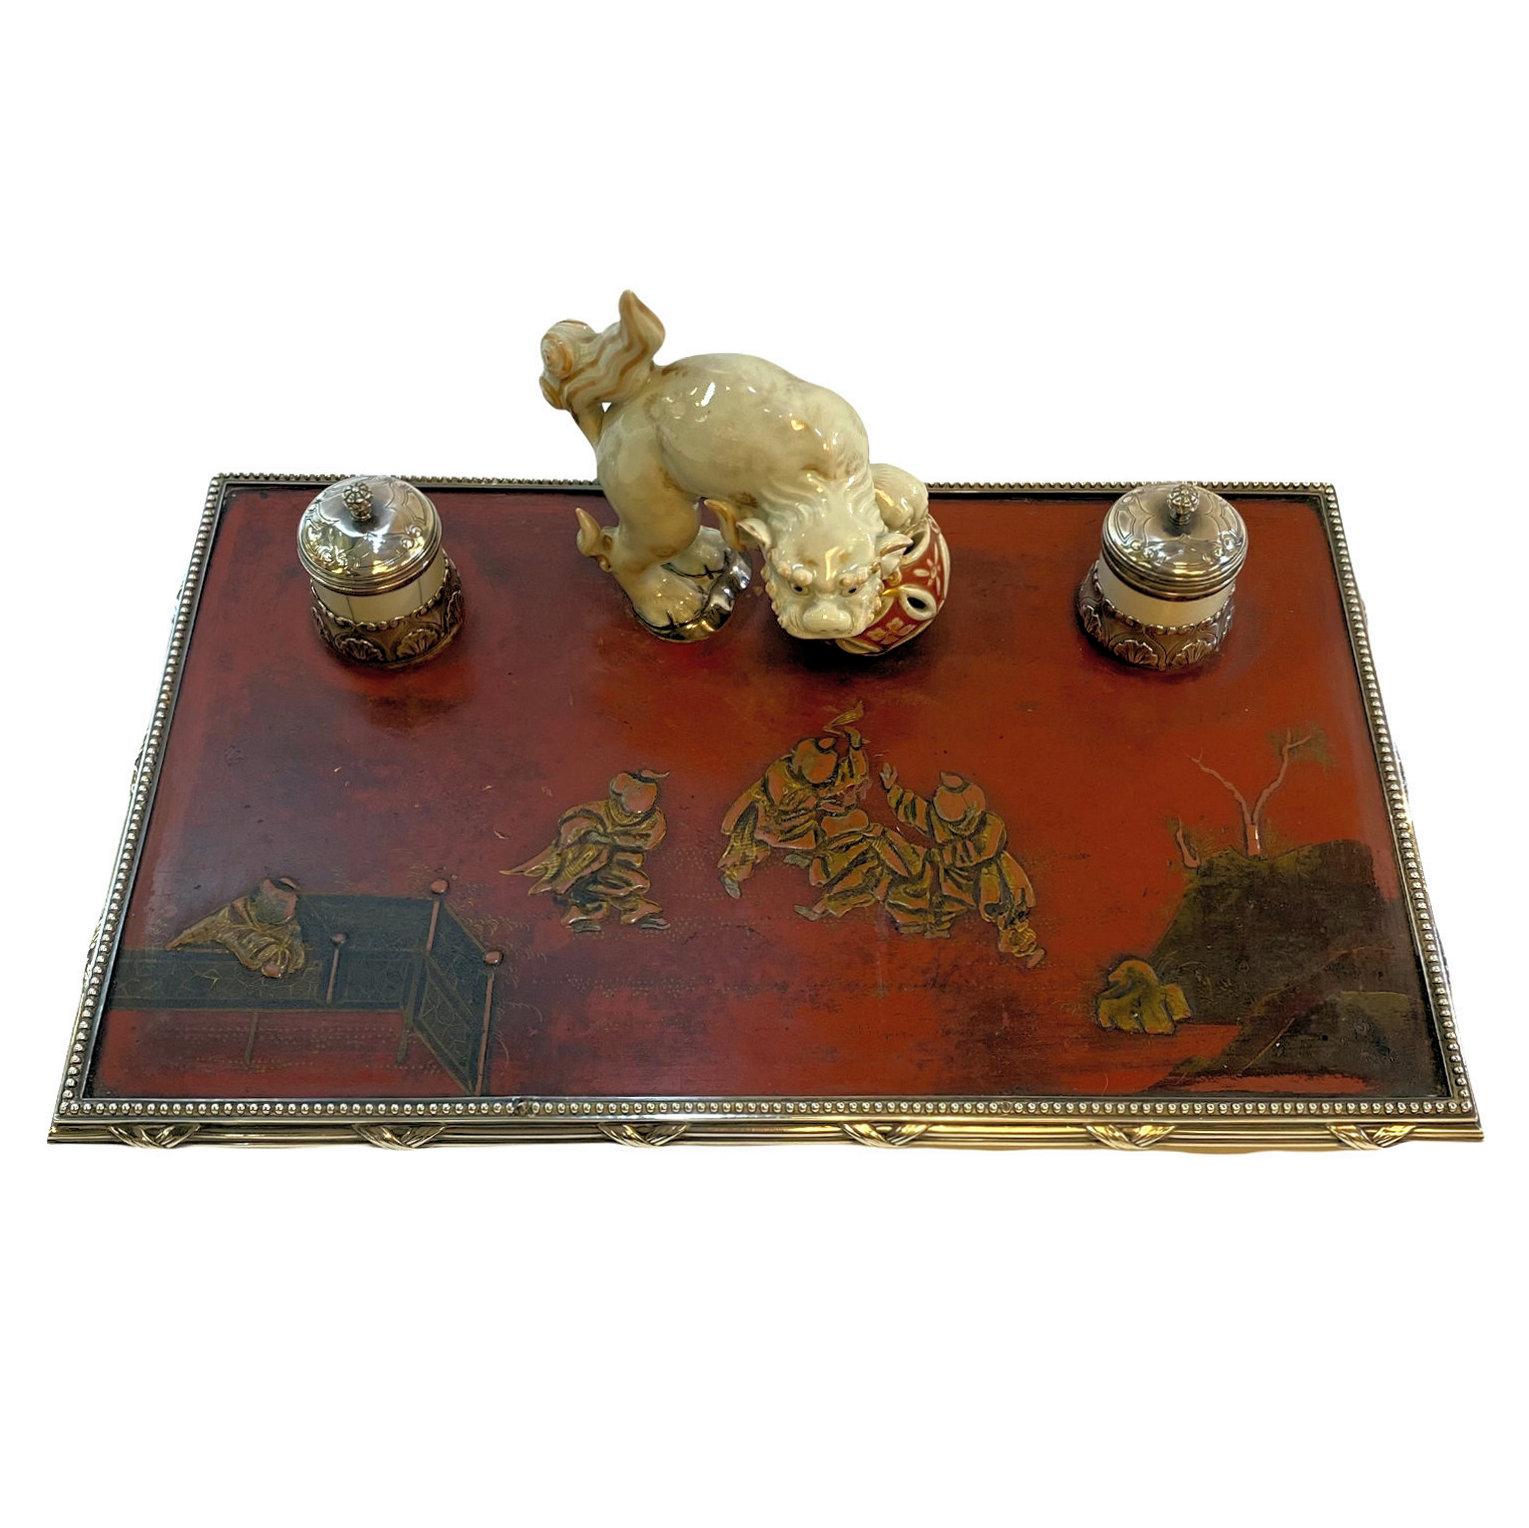 Our charming inkwell features a finely sculpted porcelain foo dog standing on lacquered wooden panel with two silver ink vessels with their original porcelain cups.  Hinge of one well is broken, but does rest nicely on its vessel and certainly could